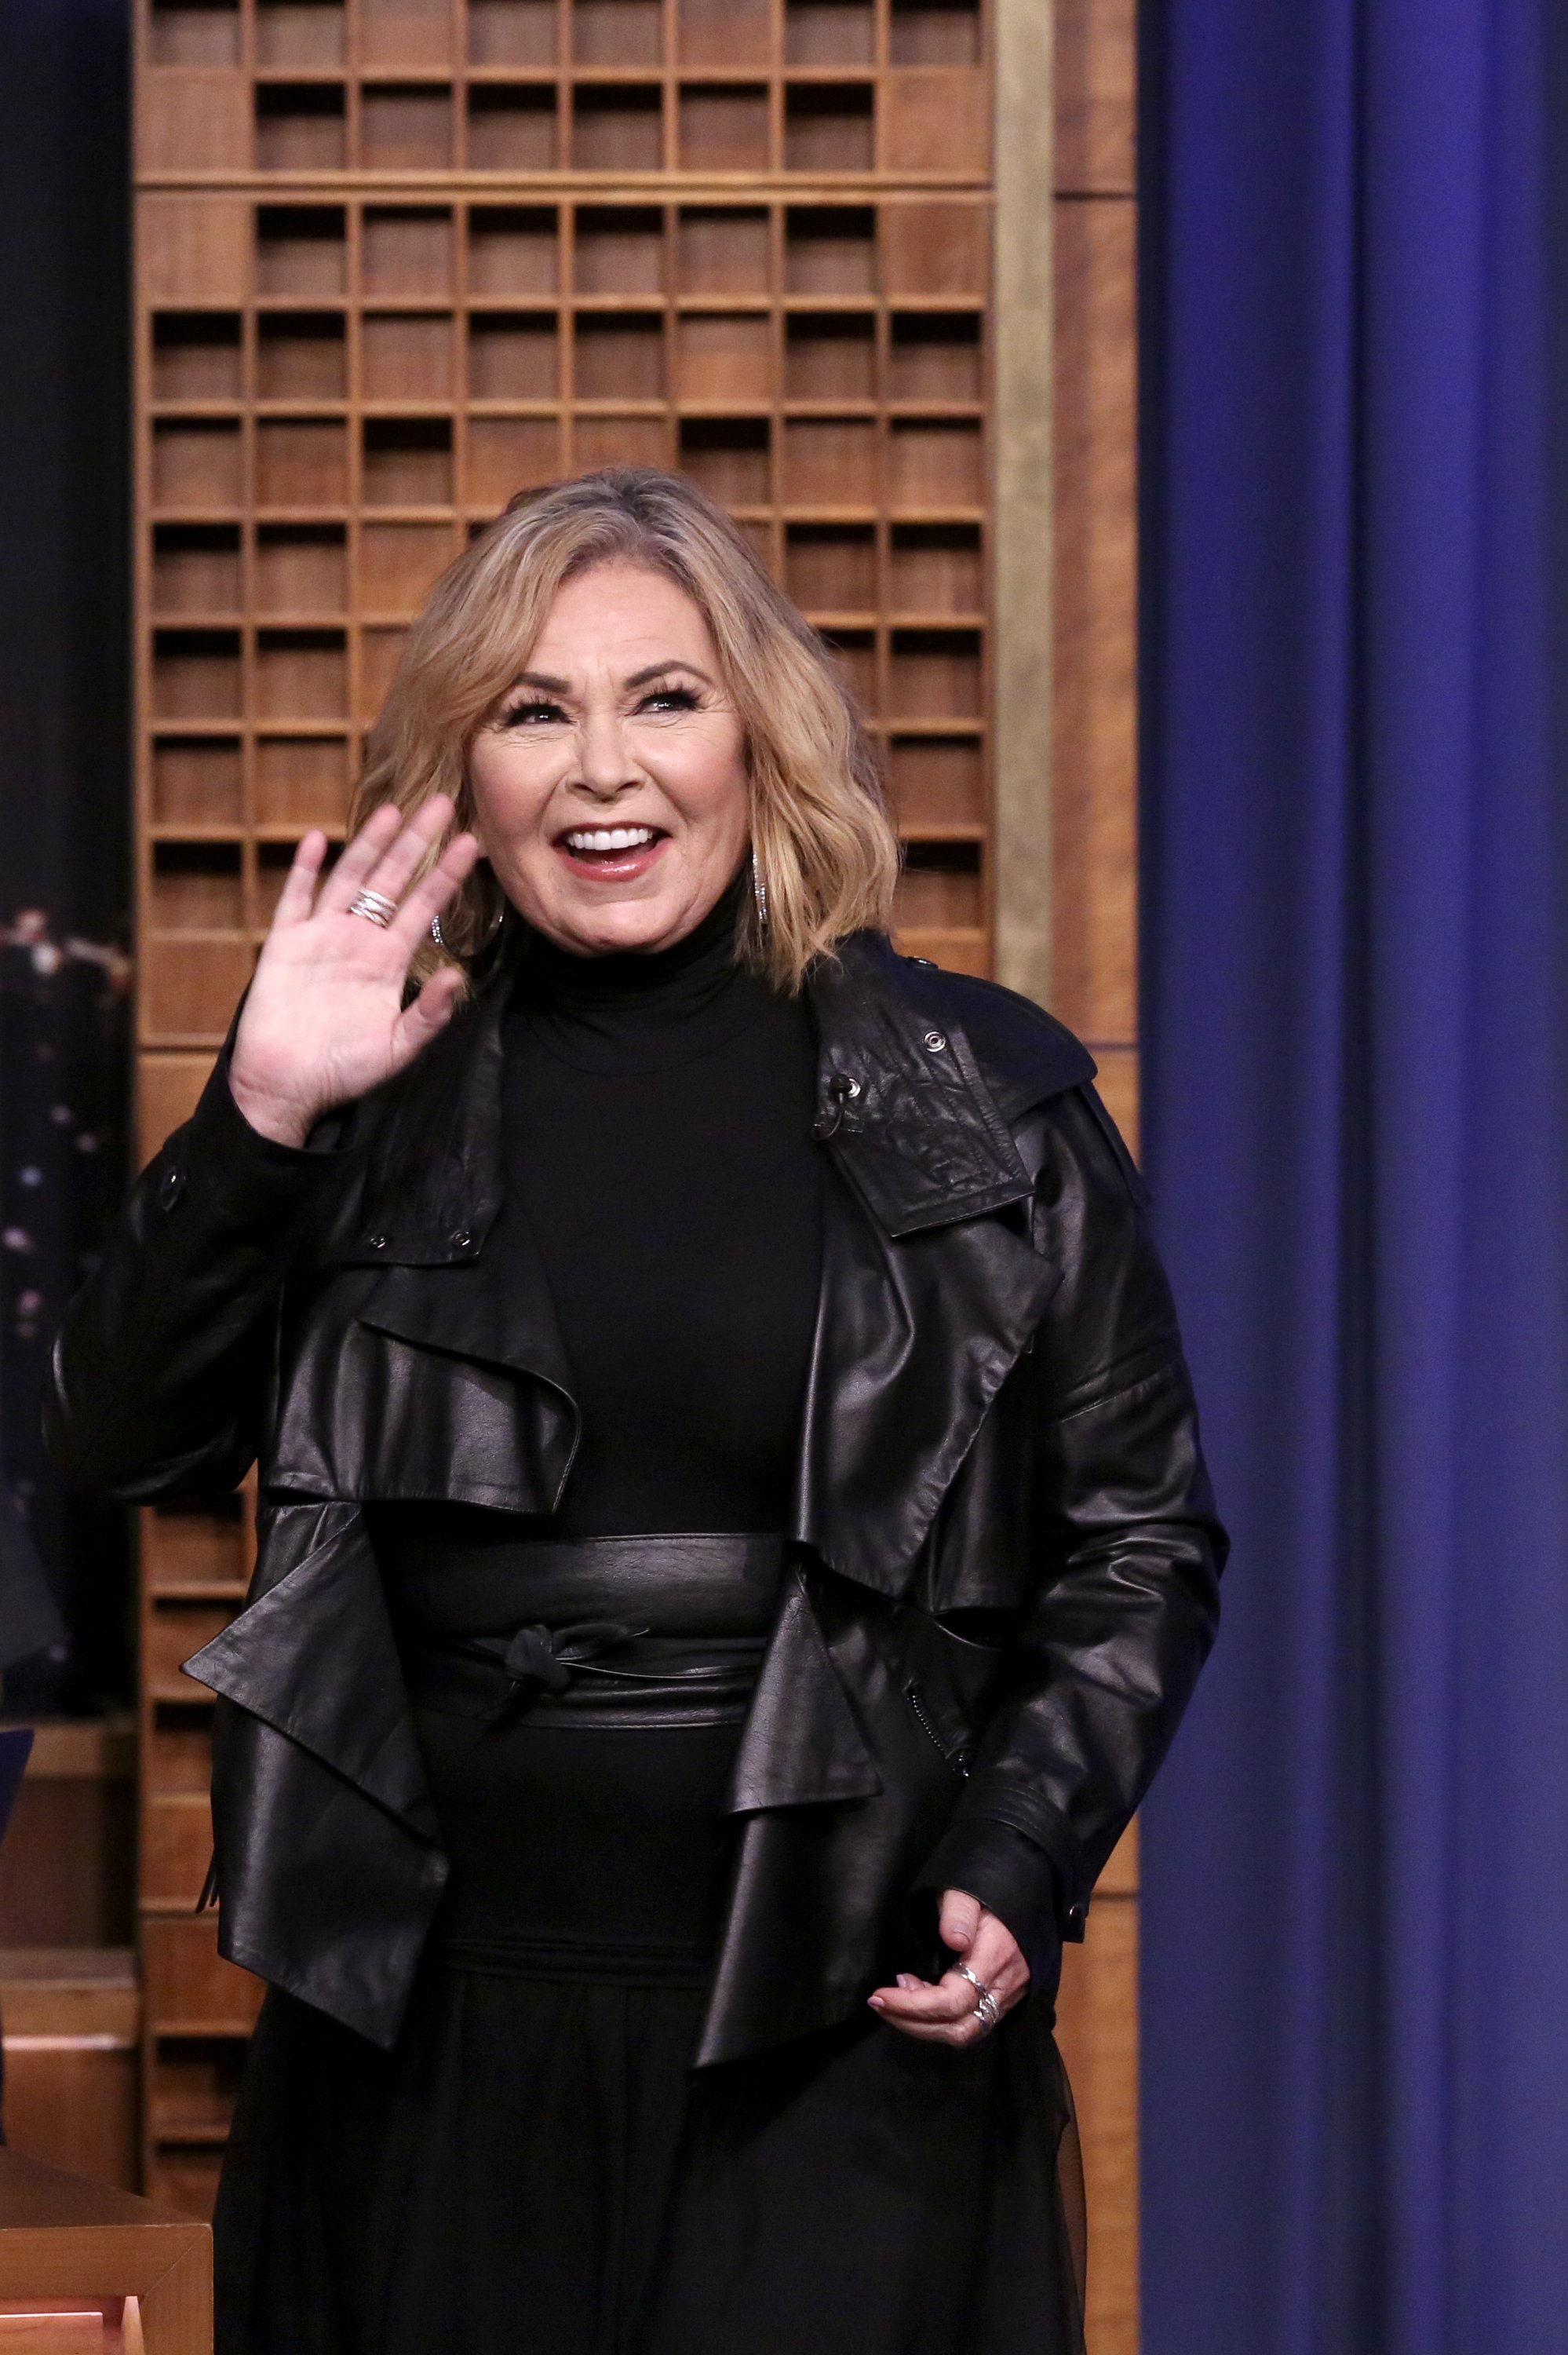 Roseanne Barr on "The Tonight Show Starring Jimmy Fallon" on April 31, 2018 | Source: Getty Images